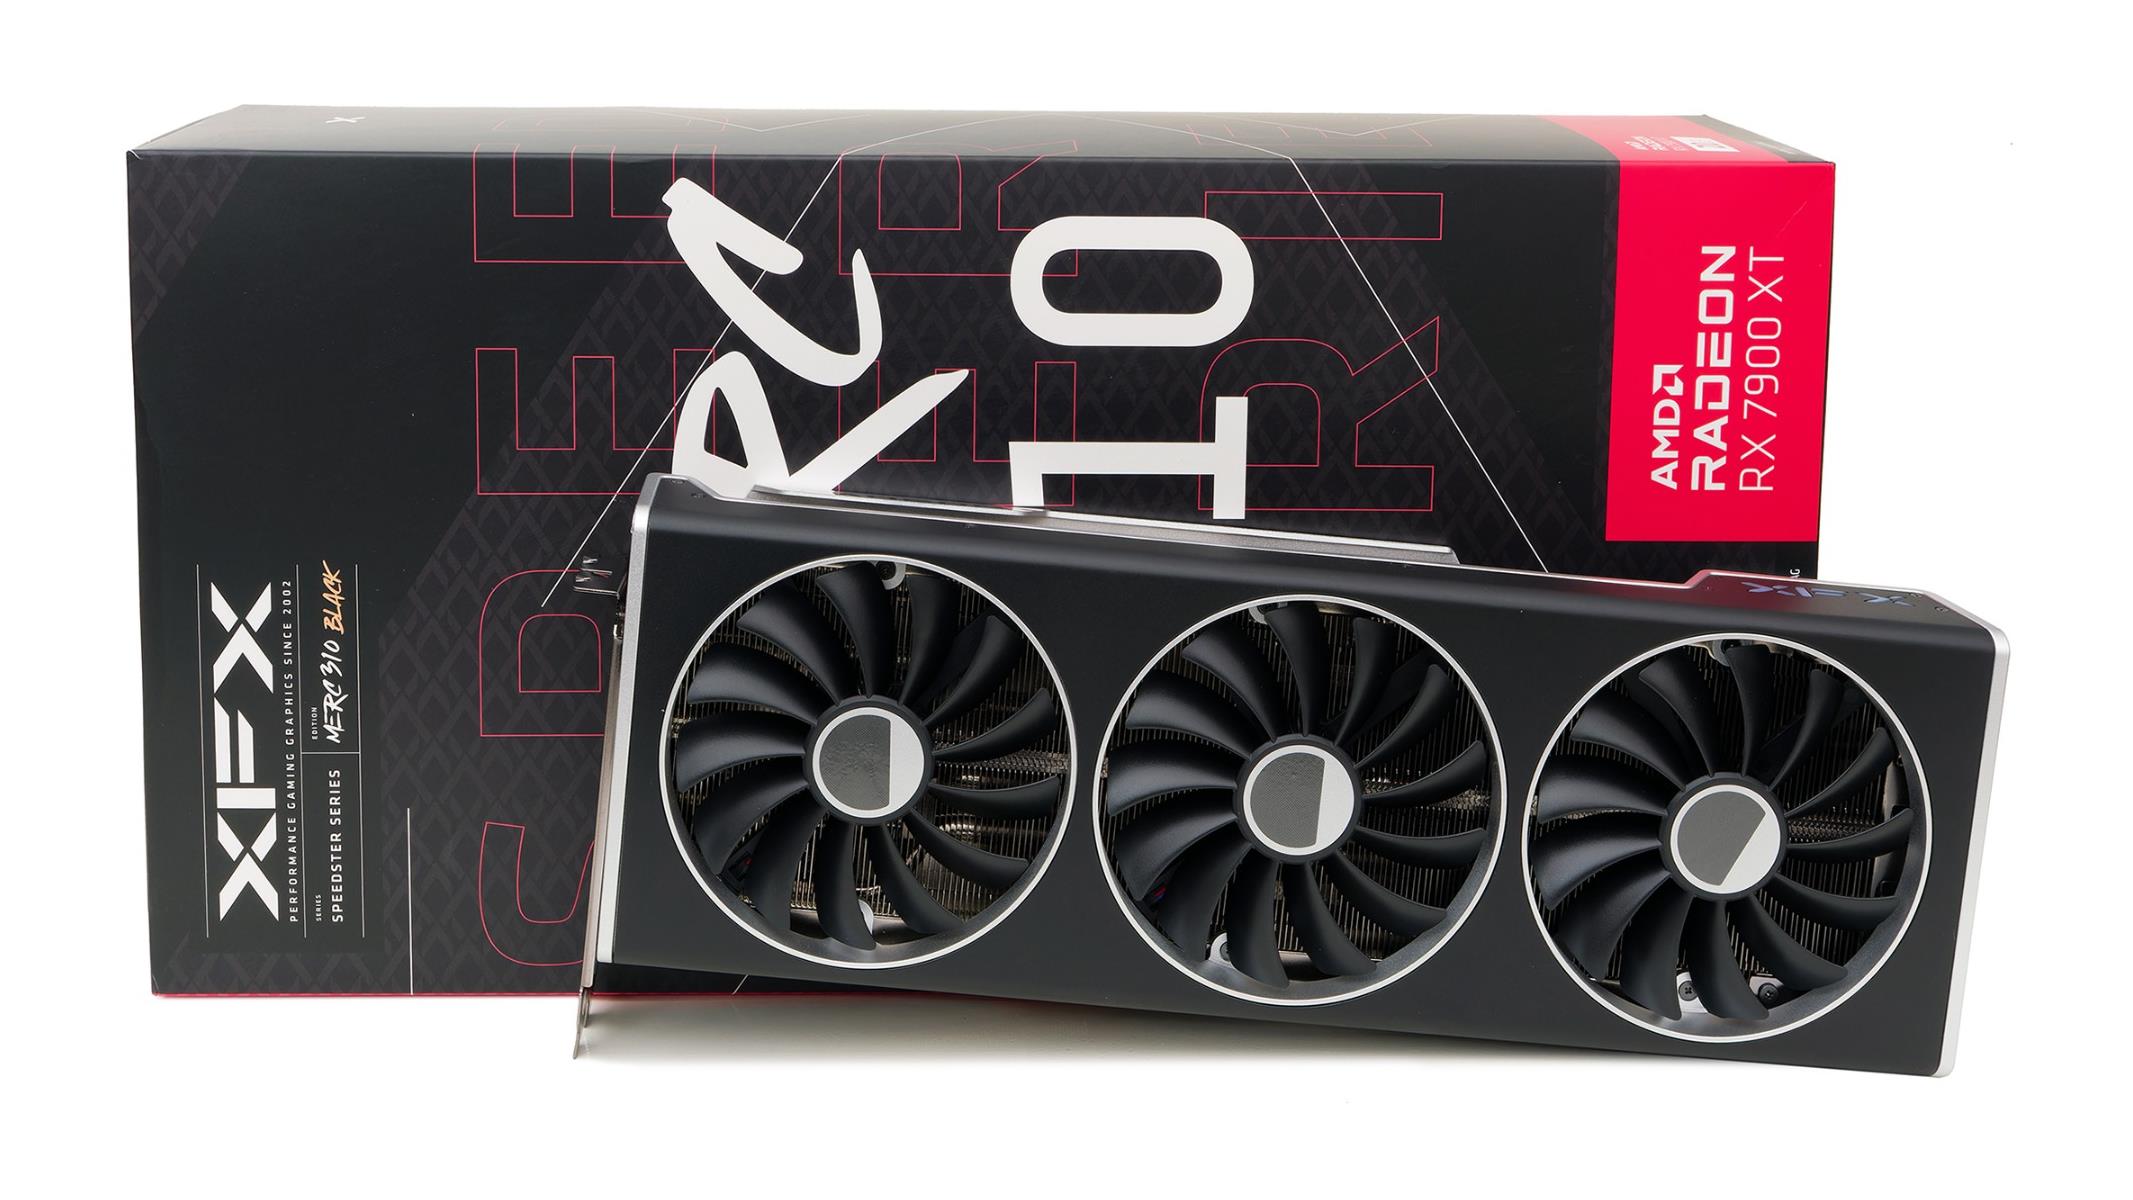 XFX AMD RADEON™ RX 7900 XT Gaming Graphics Card Unboxing And Benchmarks